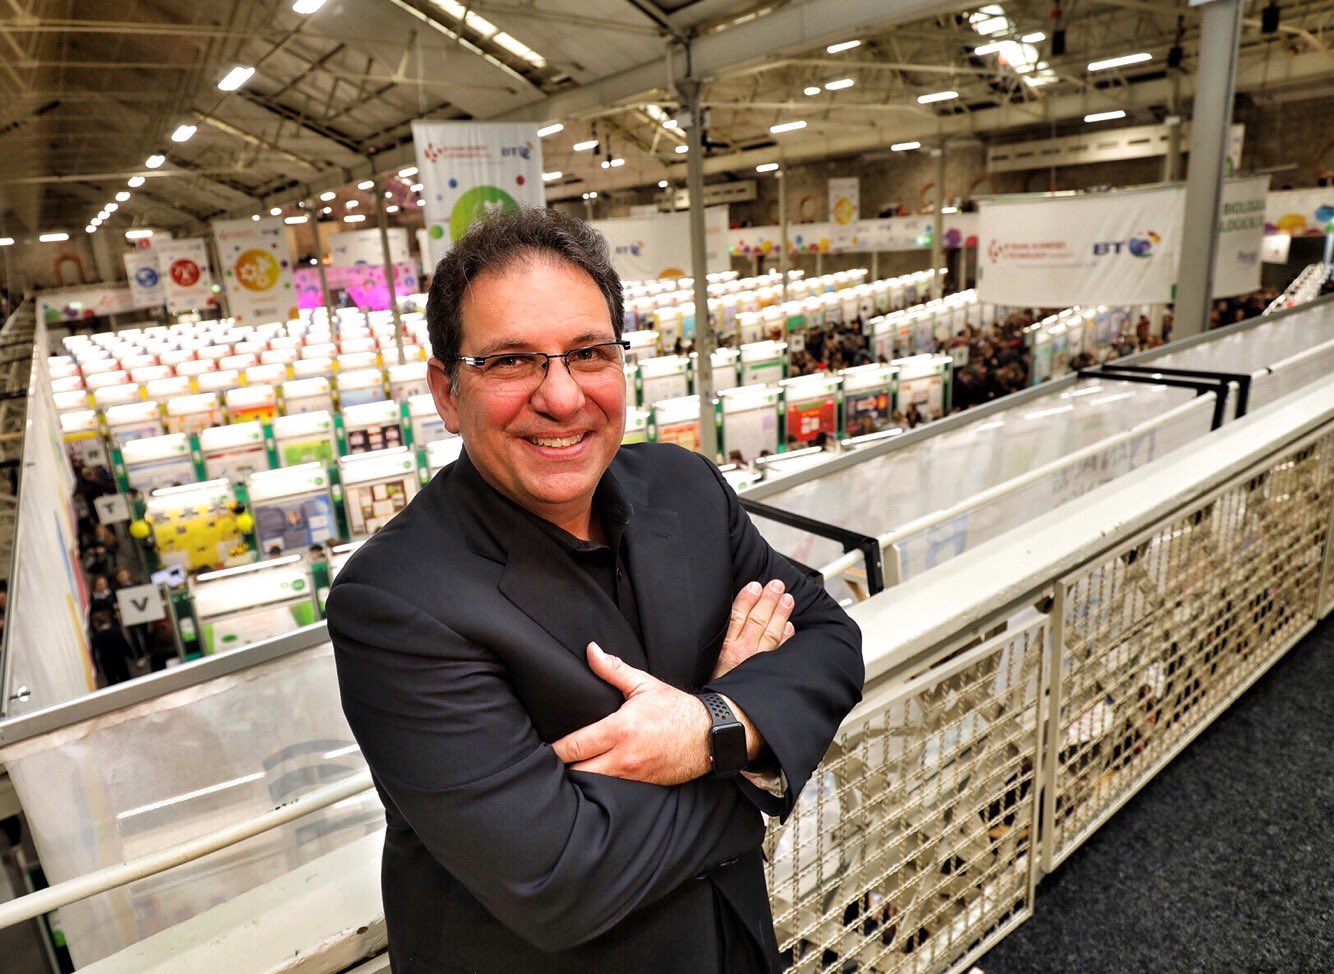 Why Should You Invest in KnowBe4's Kevin Mitnick Security Awareness